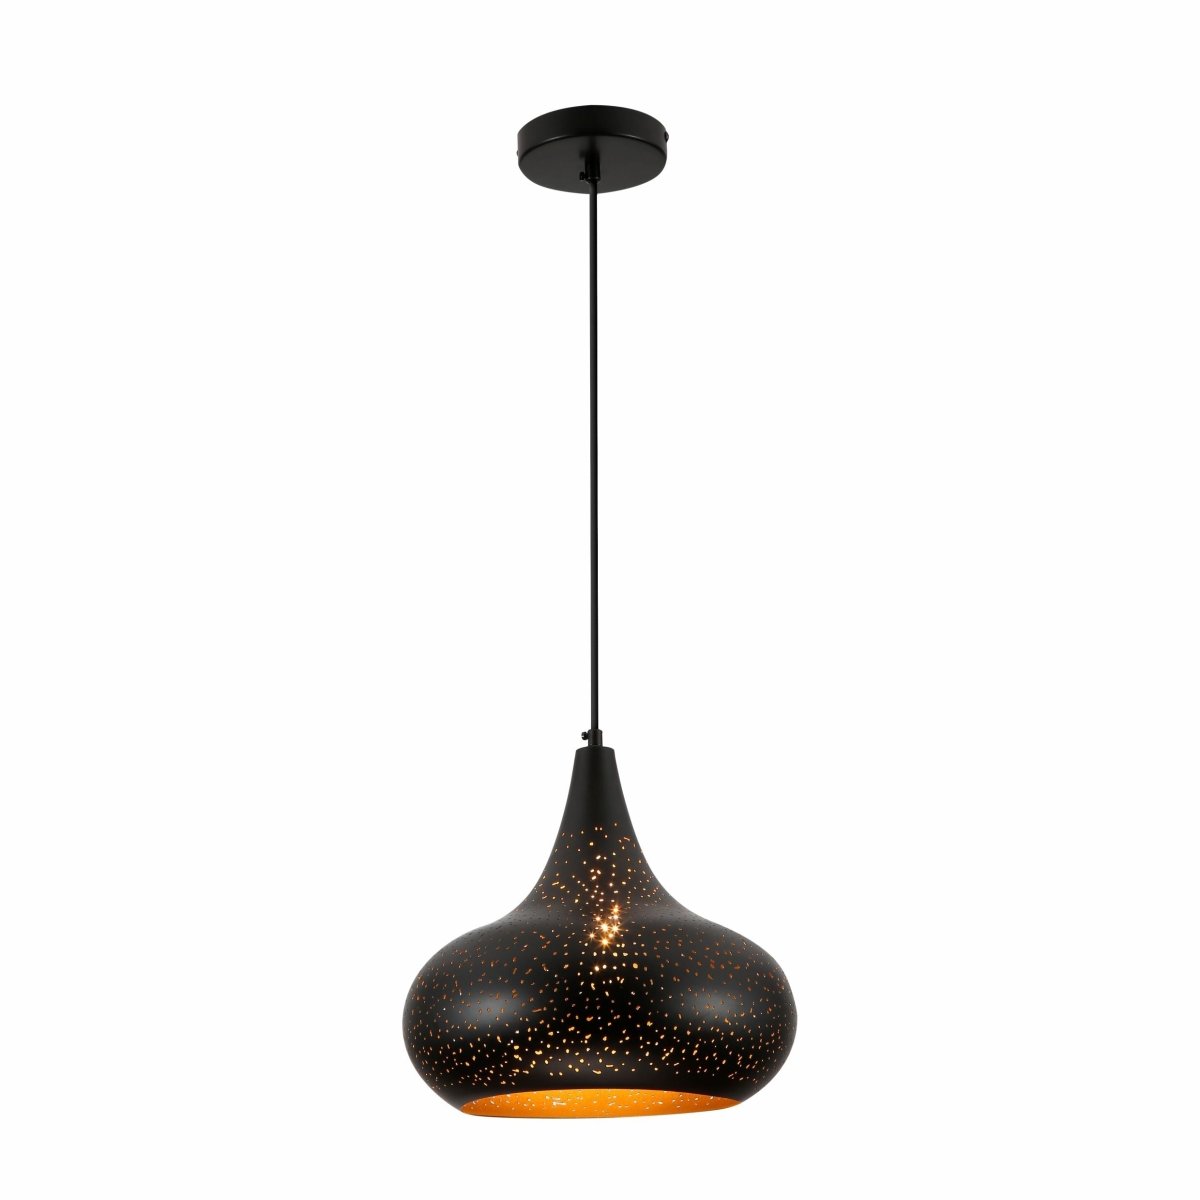 Dome Indian Dome Moroccan Night Milkyway Ceiling Pendant Light E27 Fitting  Black Gold